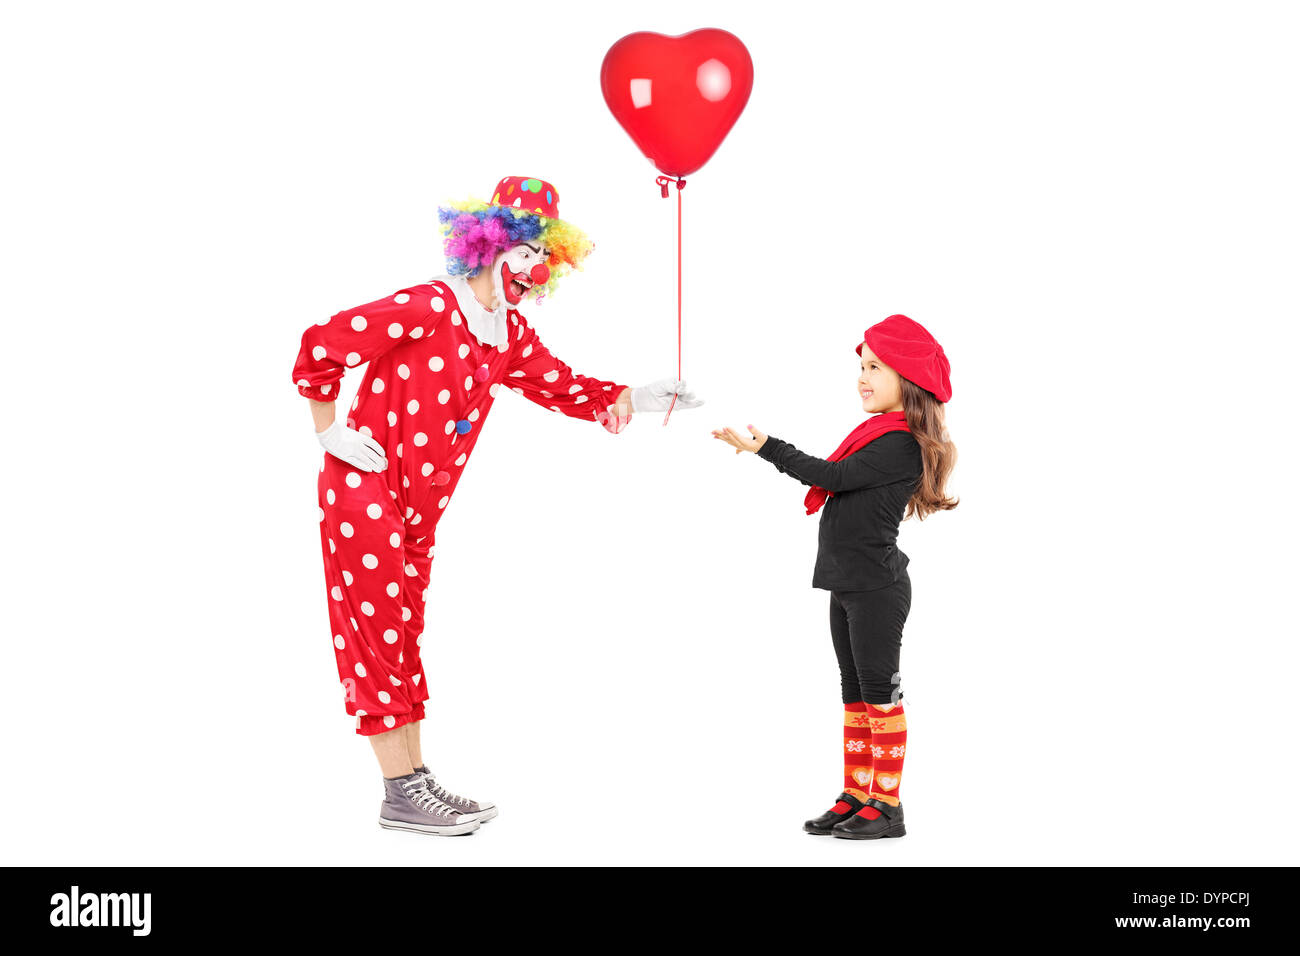 Male clown giving a red balloon to a little girl Stock Photo